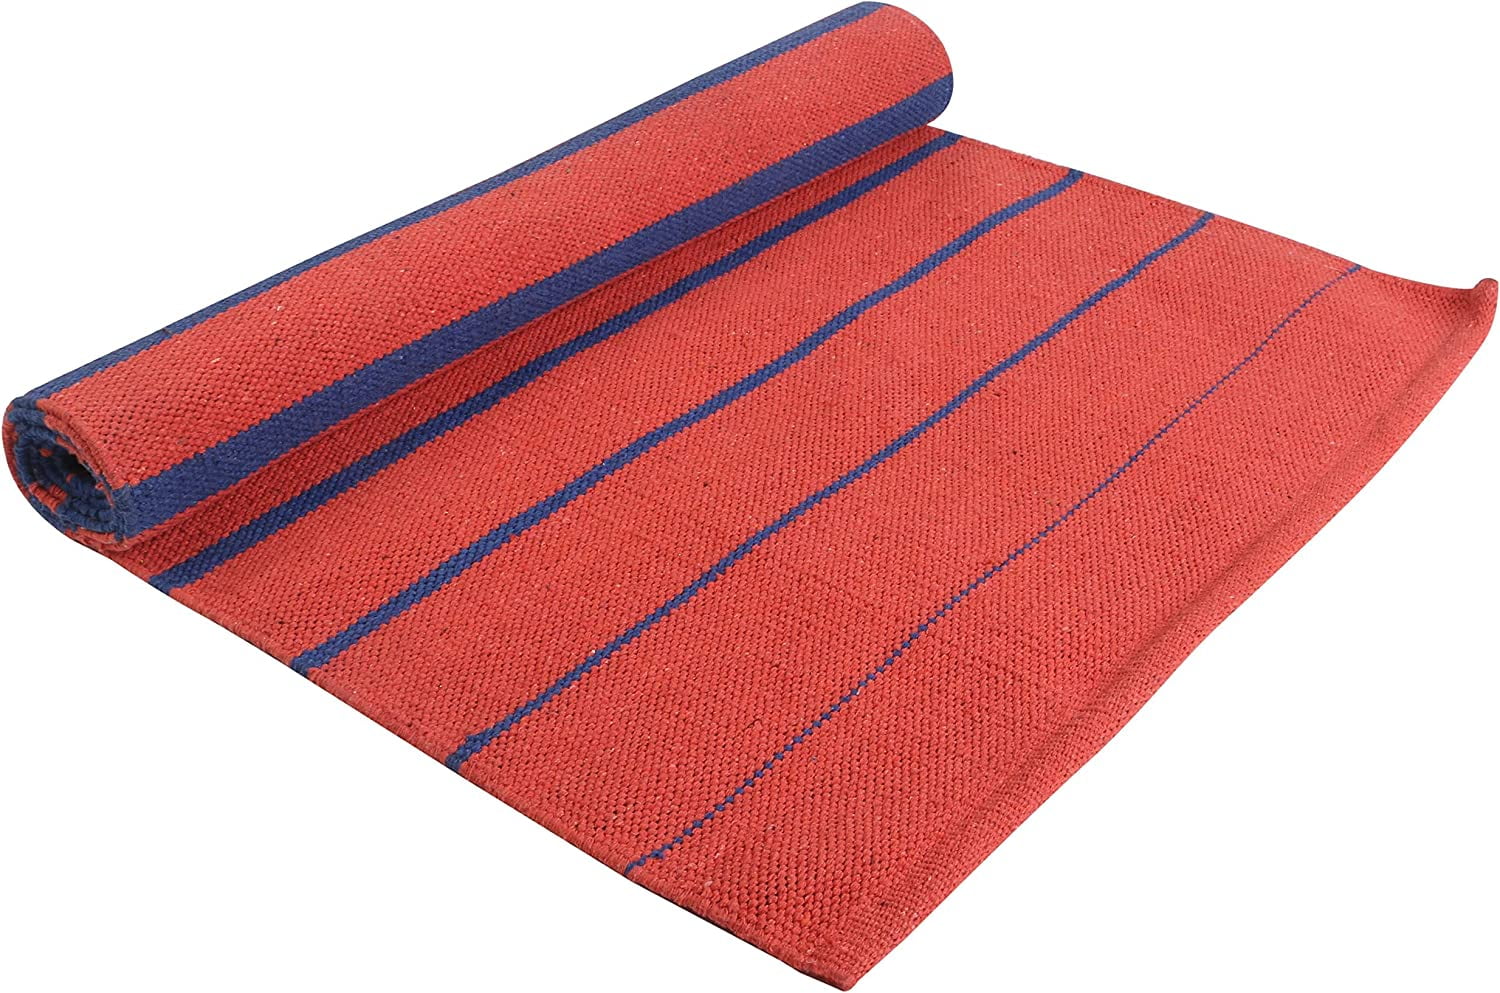 KD Cotton Yoga Mat Hand Woven Yoga Mat Eco Freindly Organic Handloom Mat  Supreme Heavy Quality with Carry Strap- 24 x 72 Exercise Mat - Red Blue